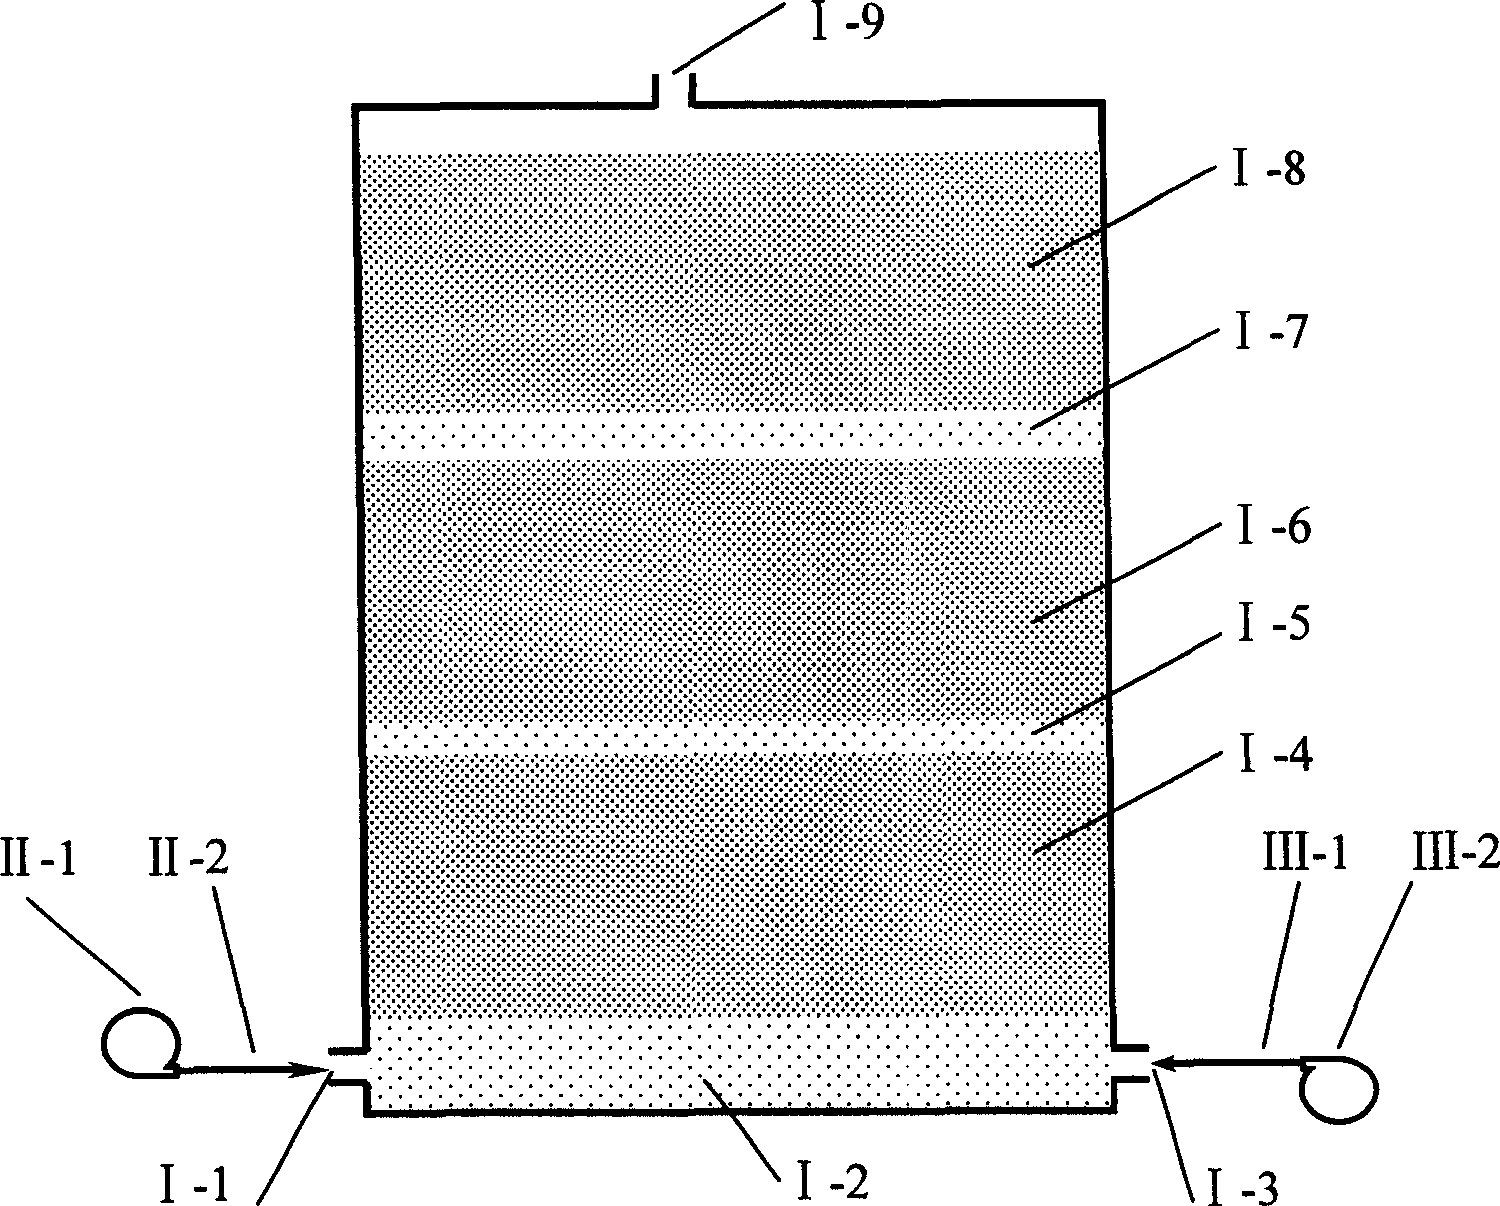 Multi-layer vertical flow methane biological oxidation device